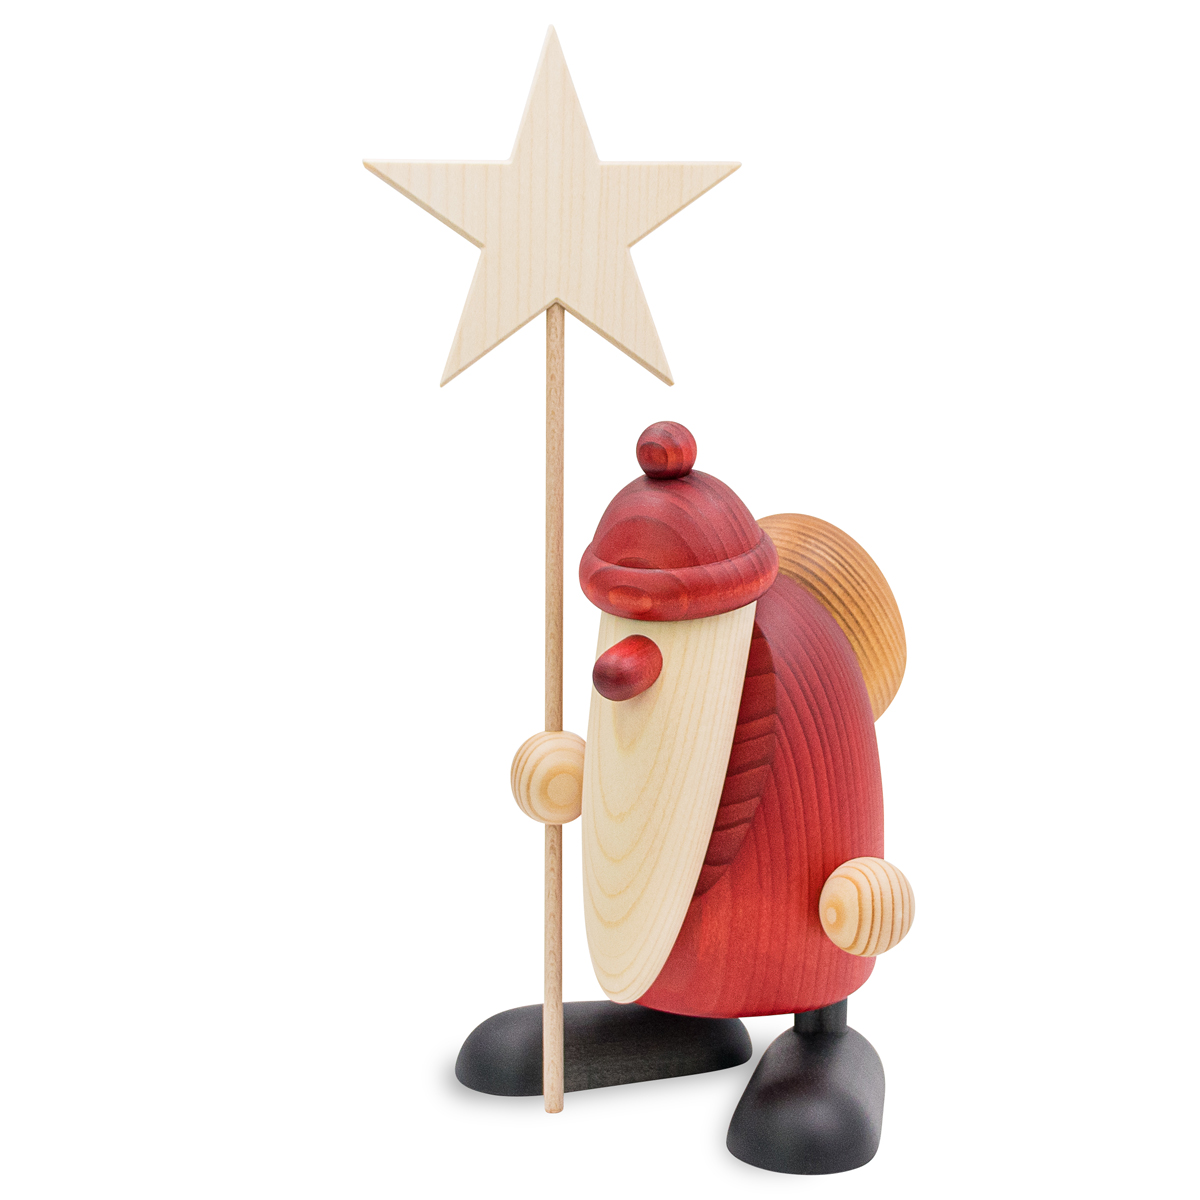  Santa Claus with star, large